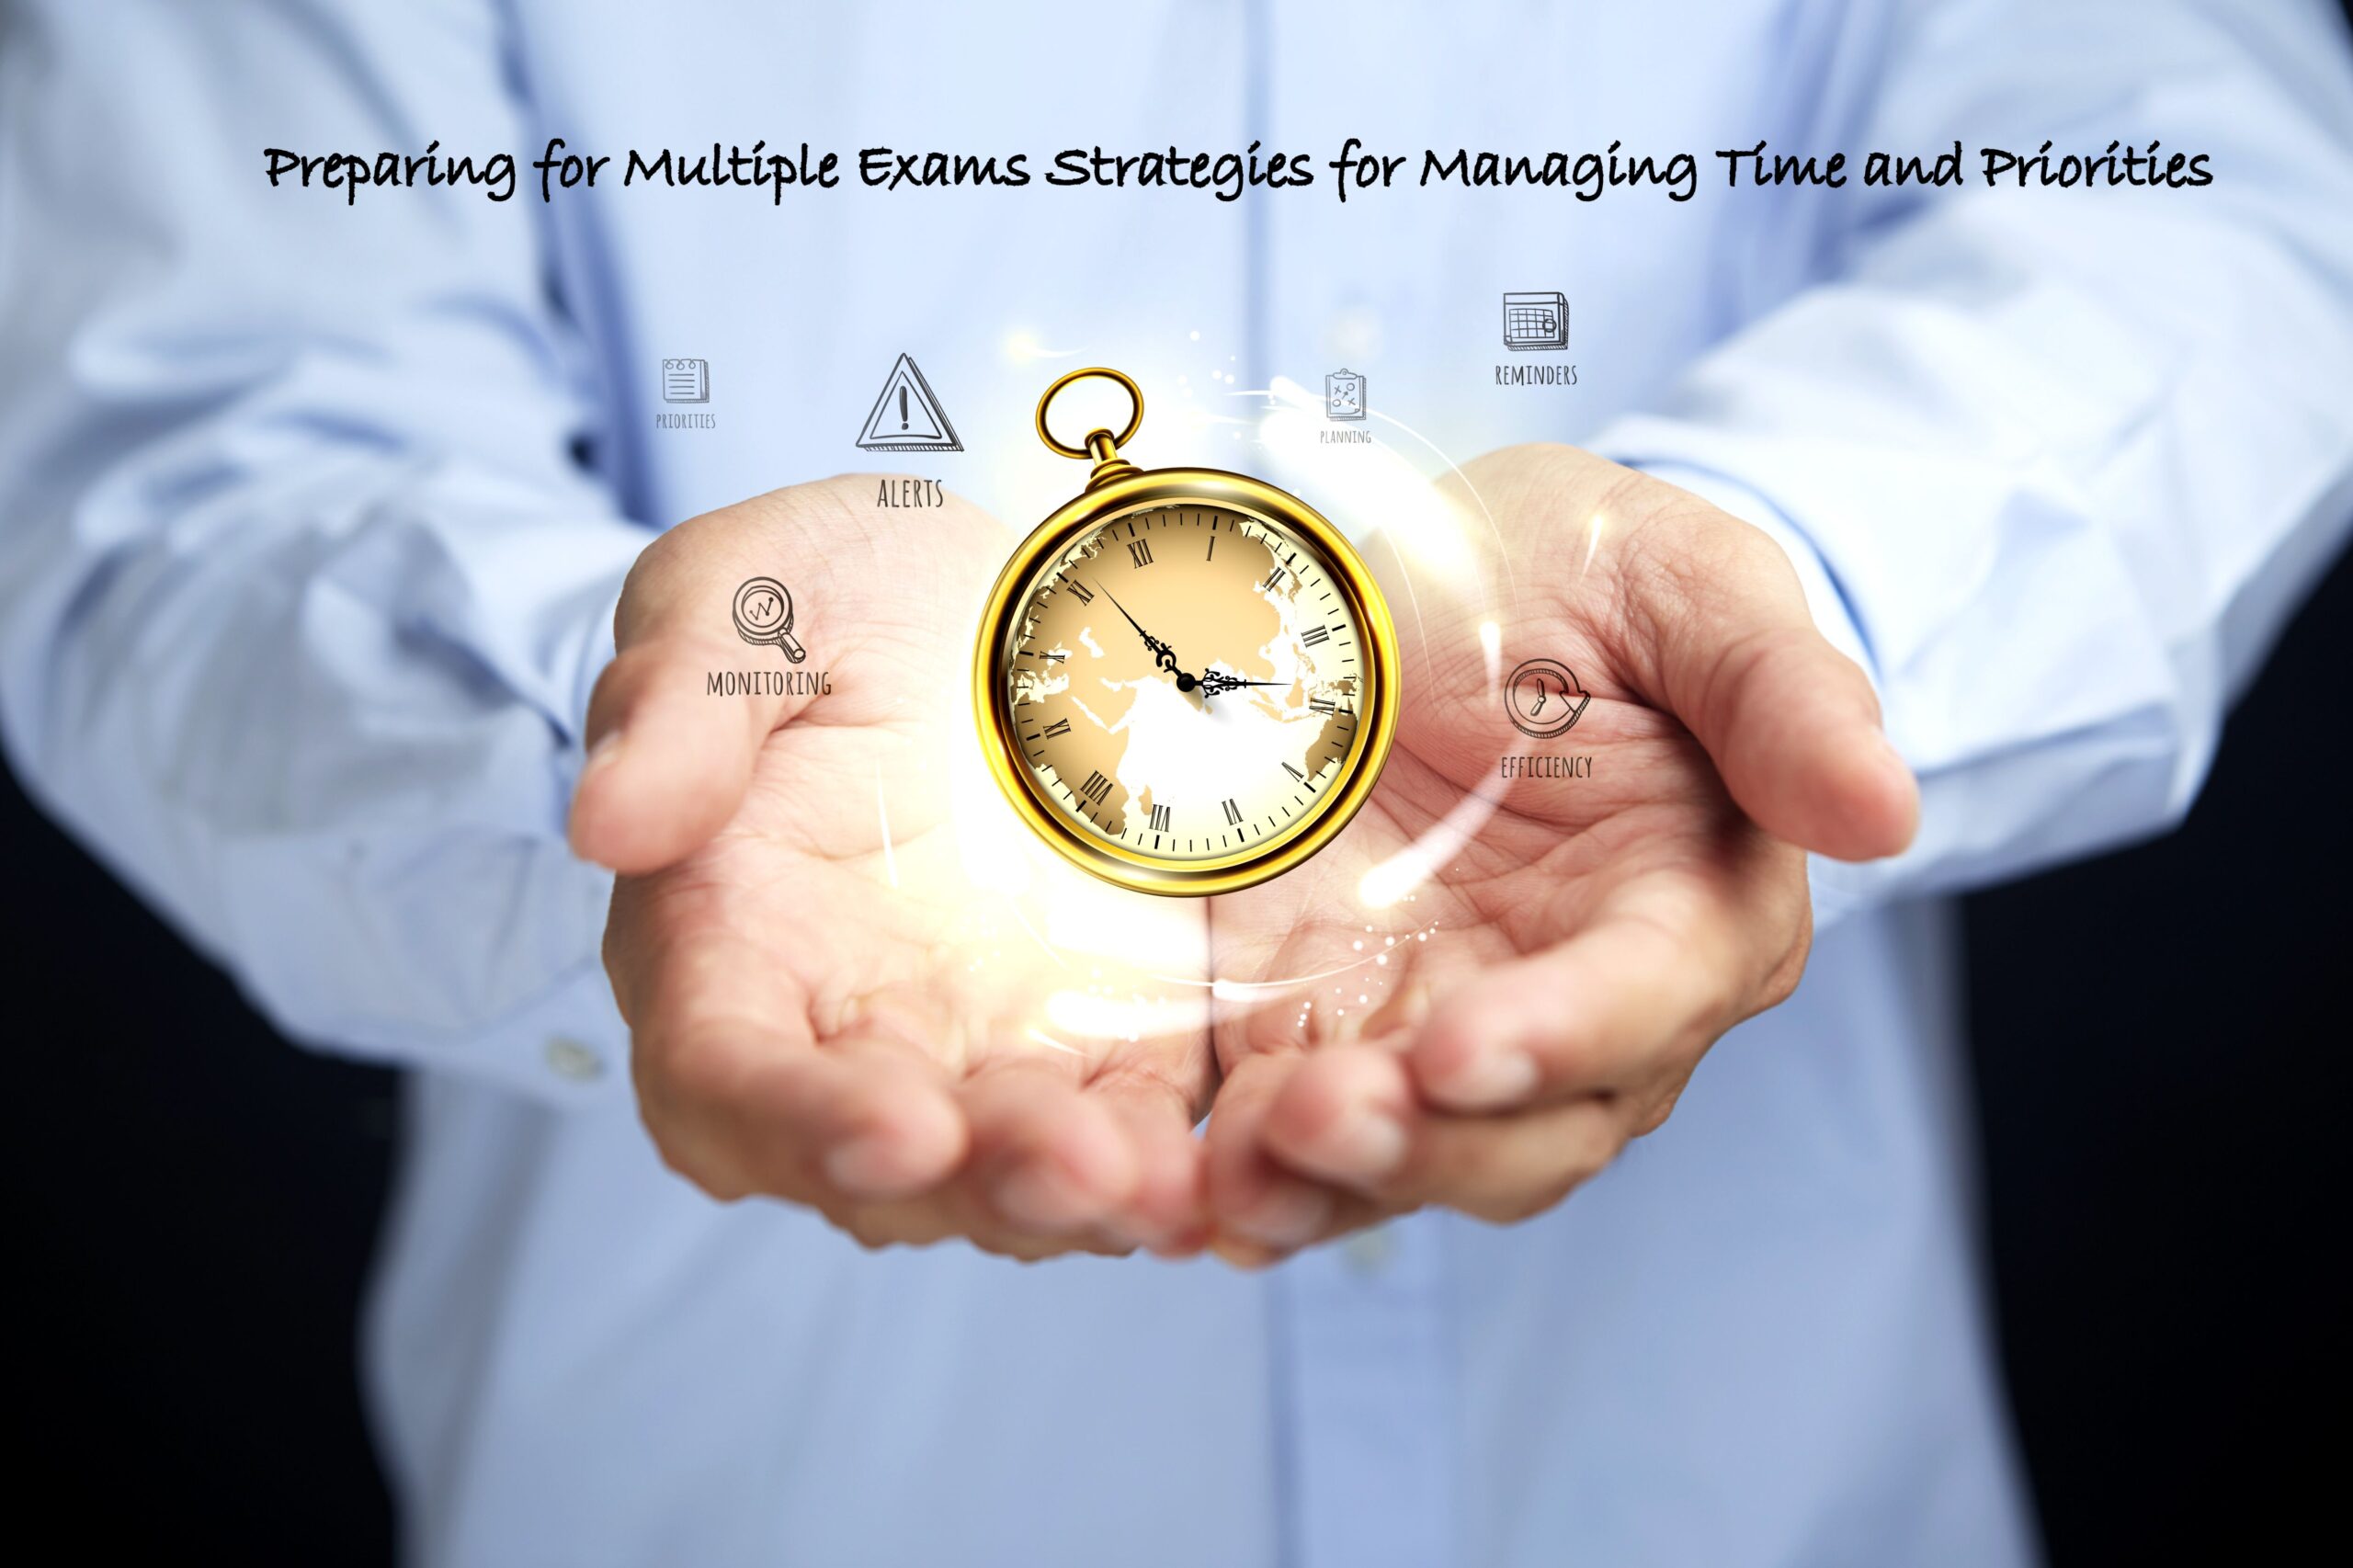 Preparing for Multiple Exams: Strategies for Managing Time and Priorities